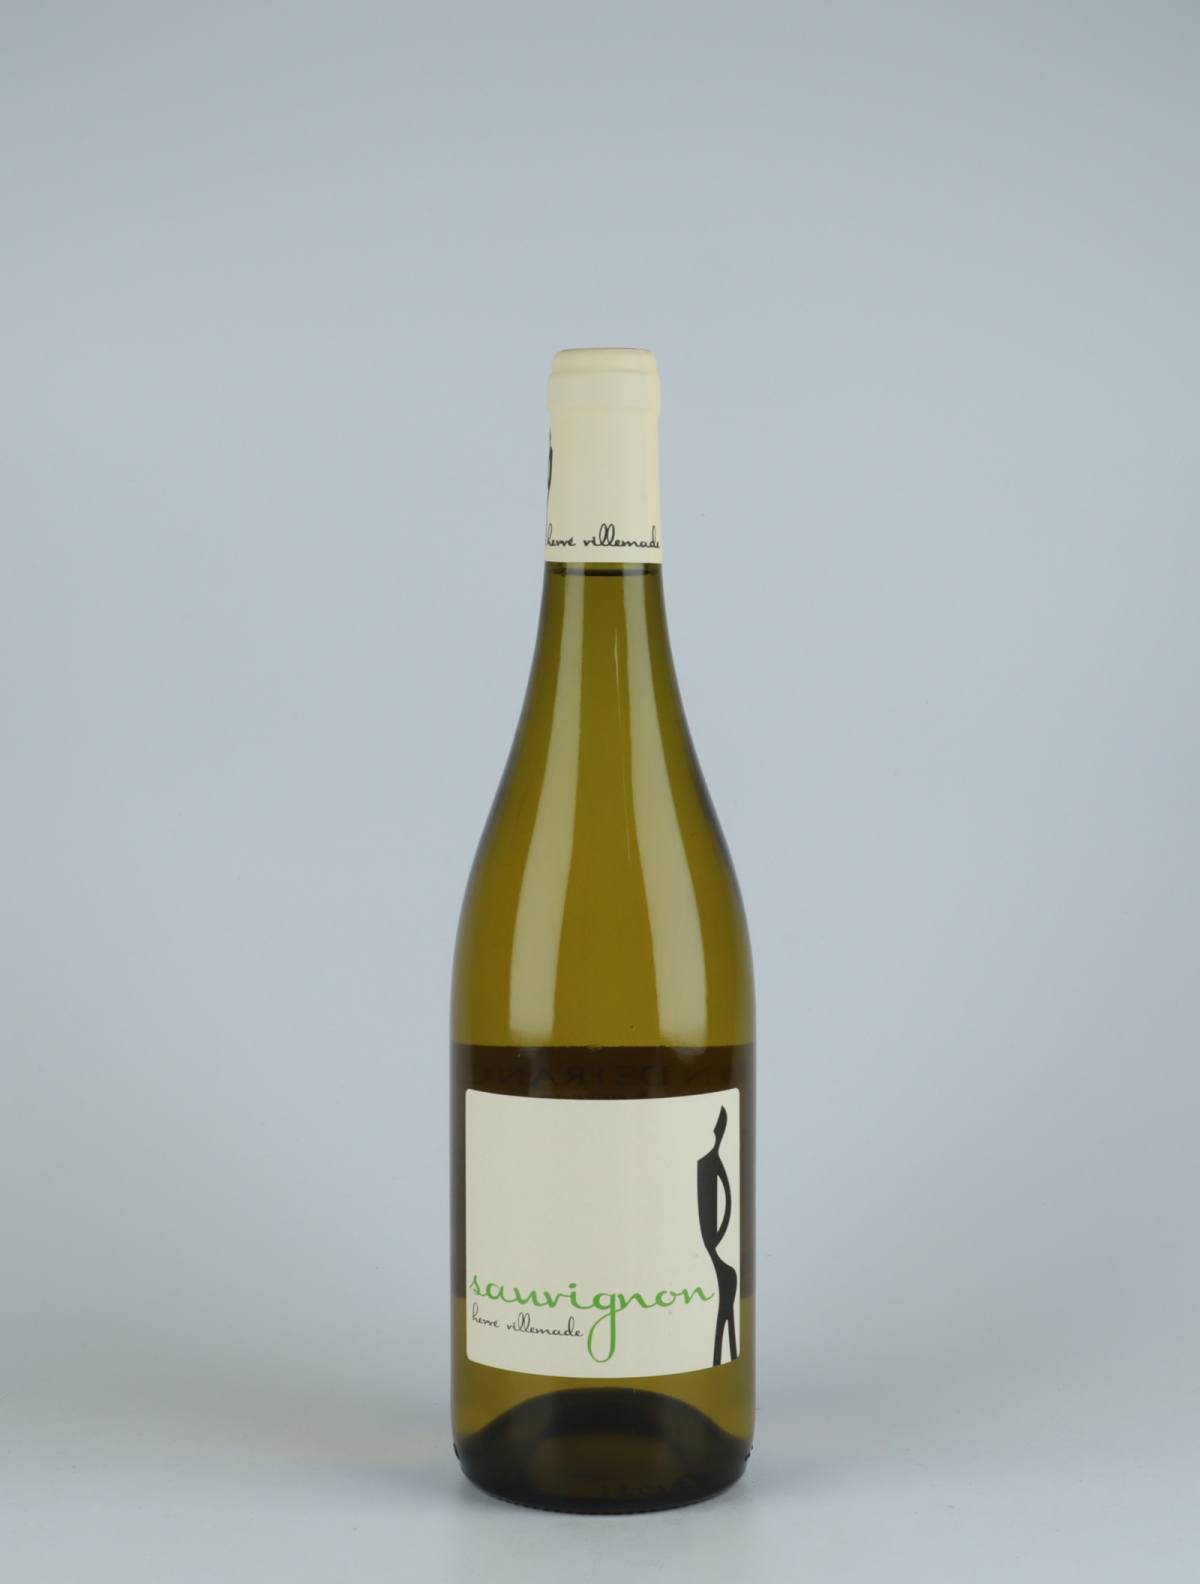 A bottle 2020 Sauvignon Blanc White wine from , Loire in France